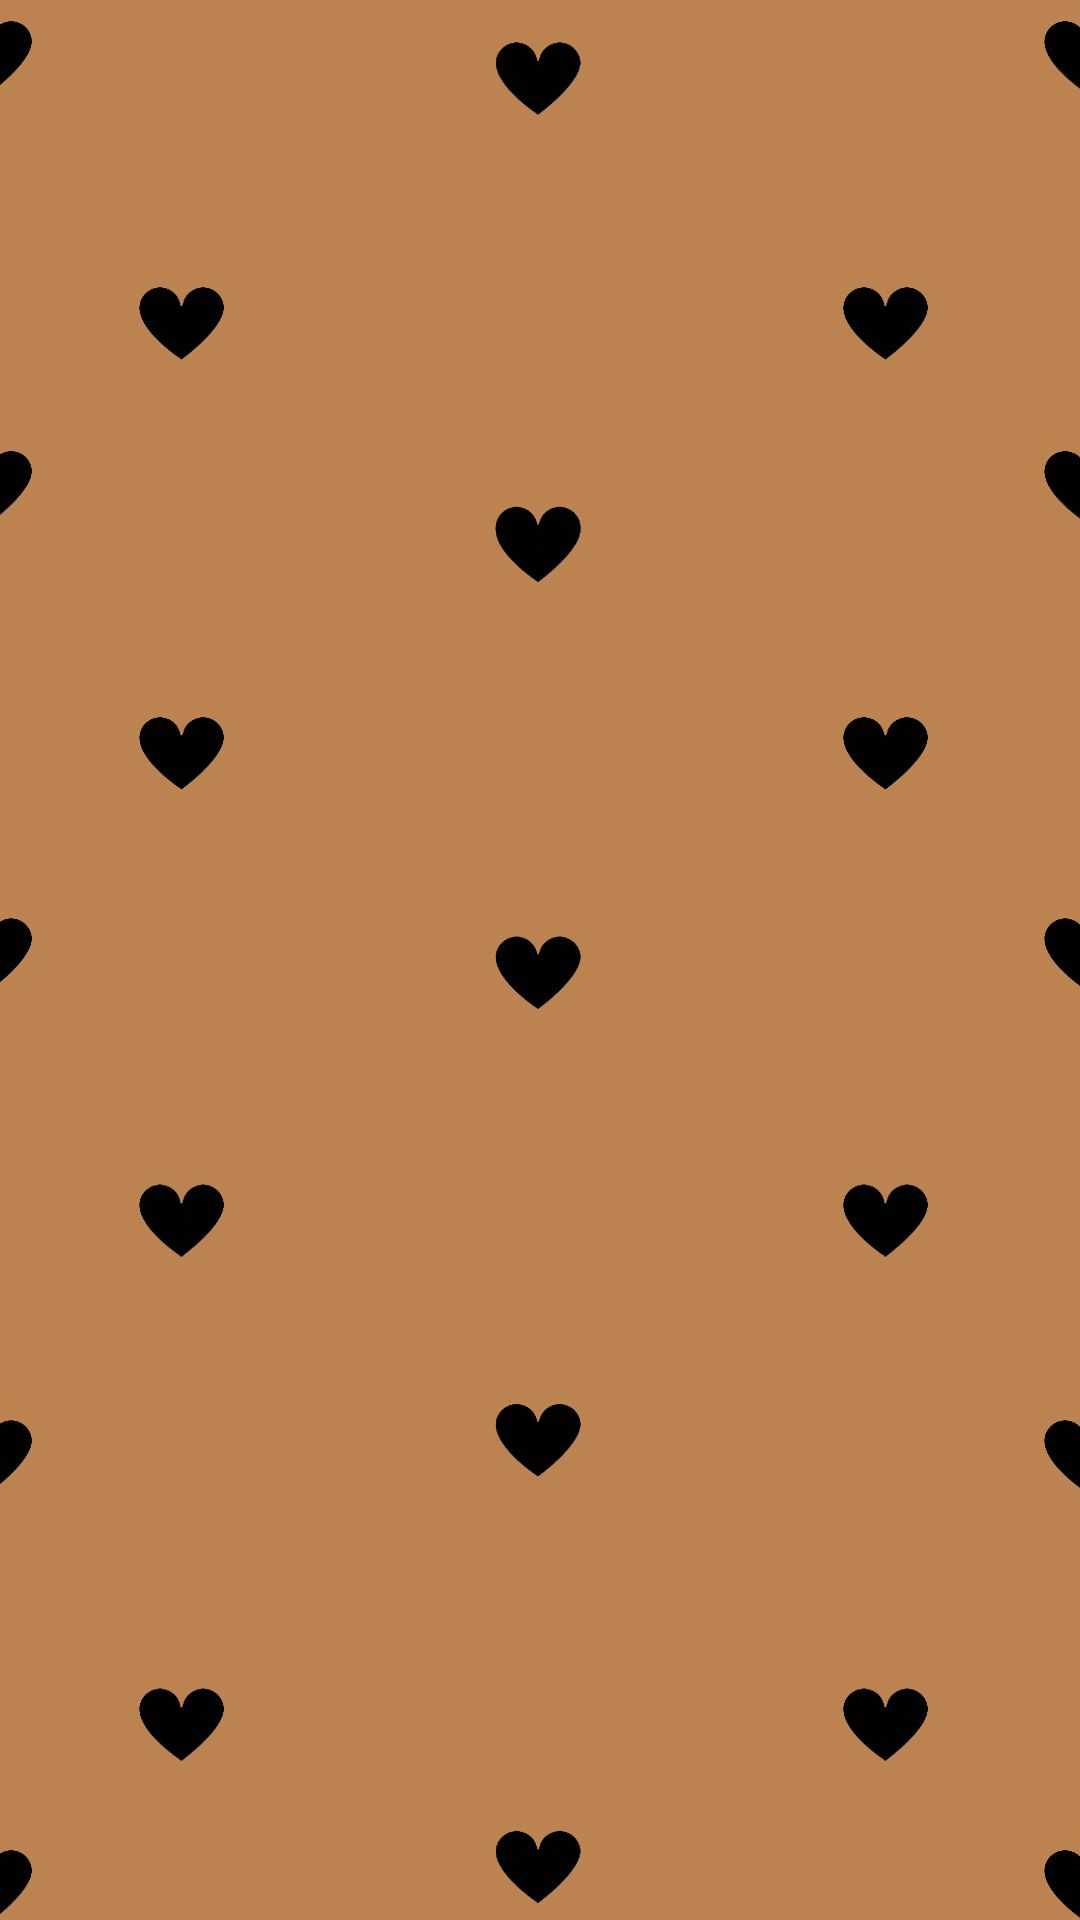 A brown background with black hearts - Heart